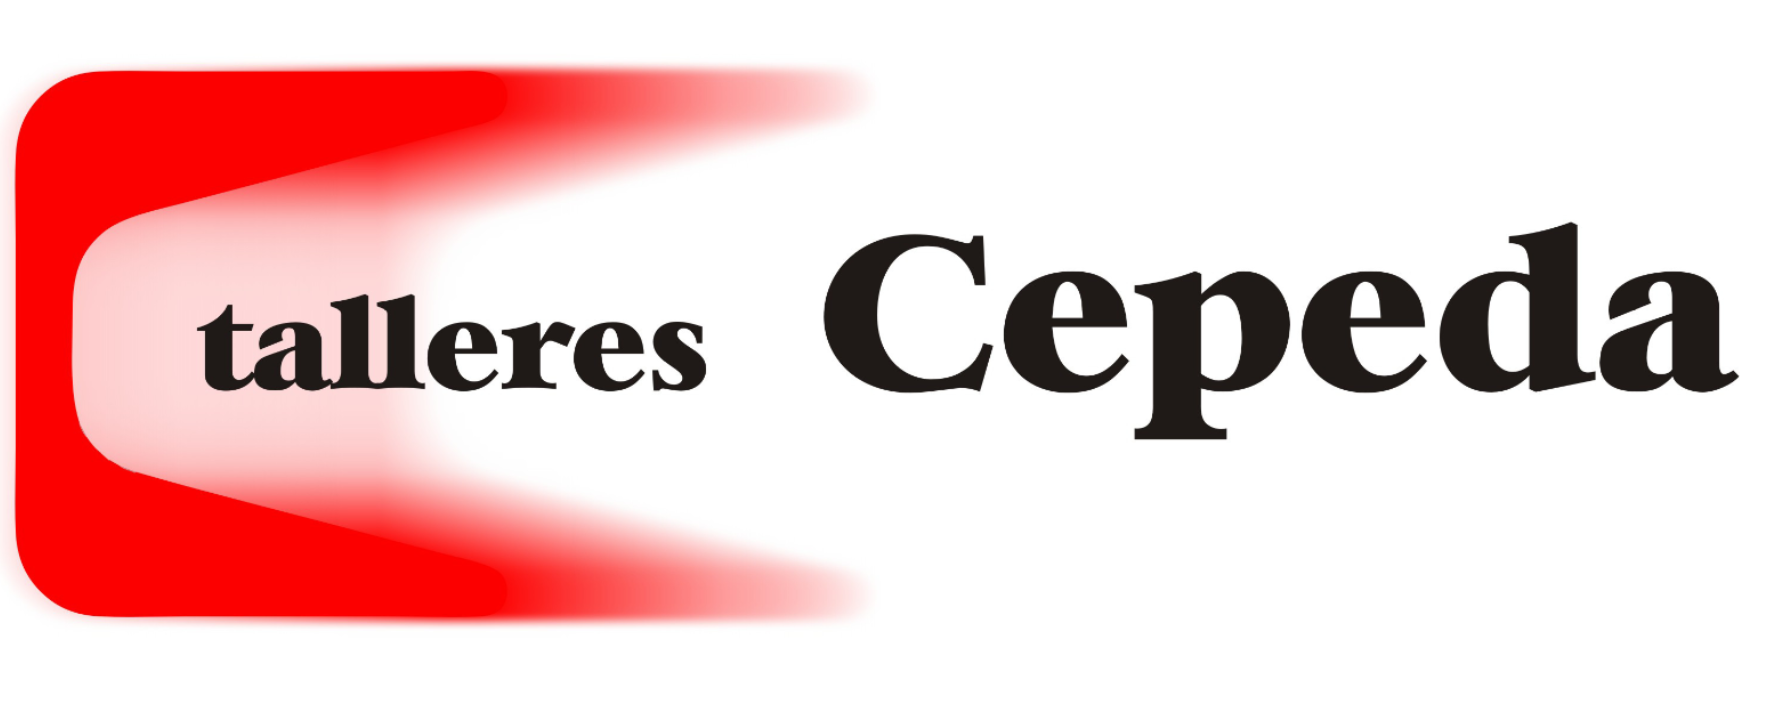 Talleres Cepeda